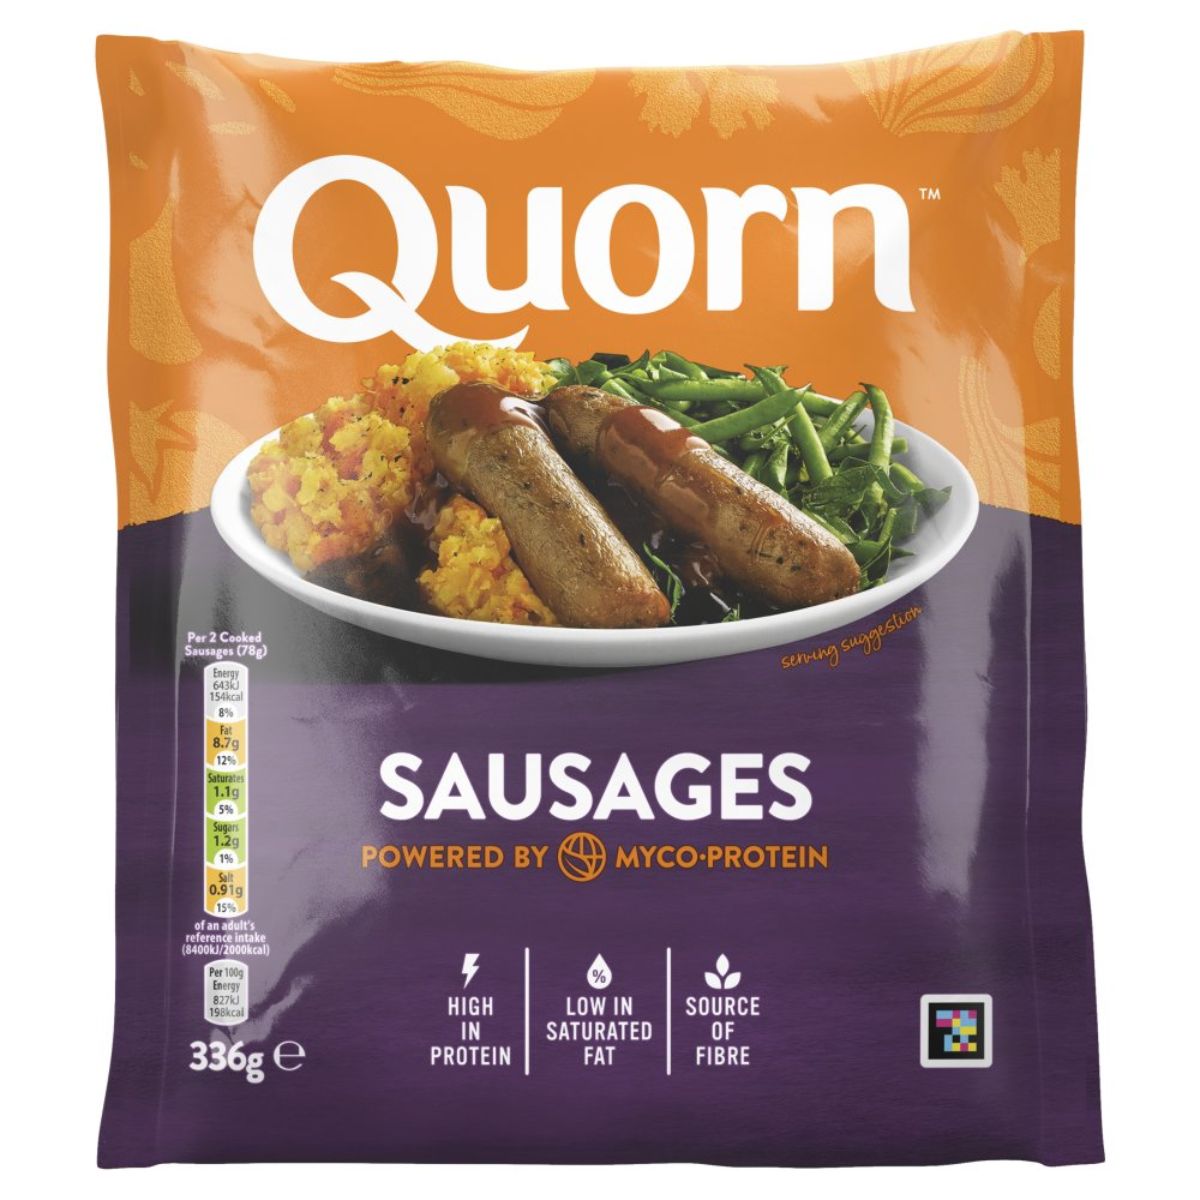 Quorn - Sausages Deliciously Meat Free - 336g on a white background.